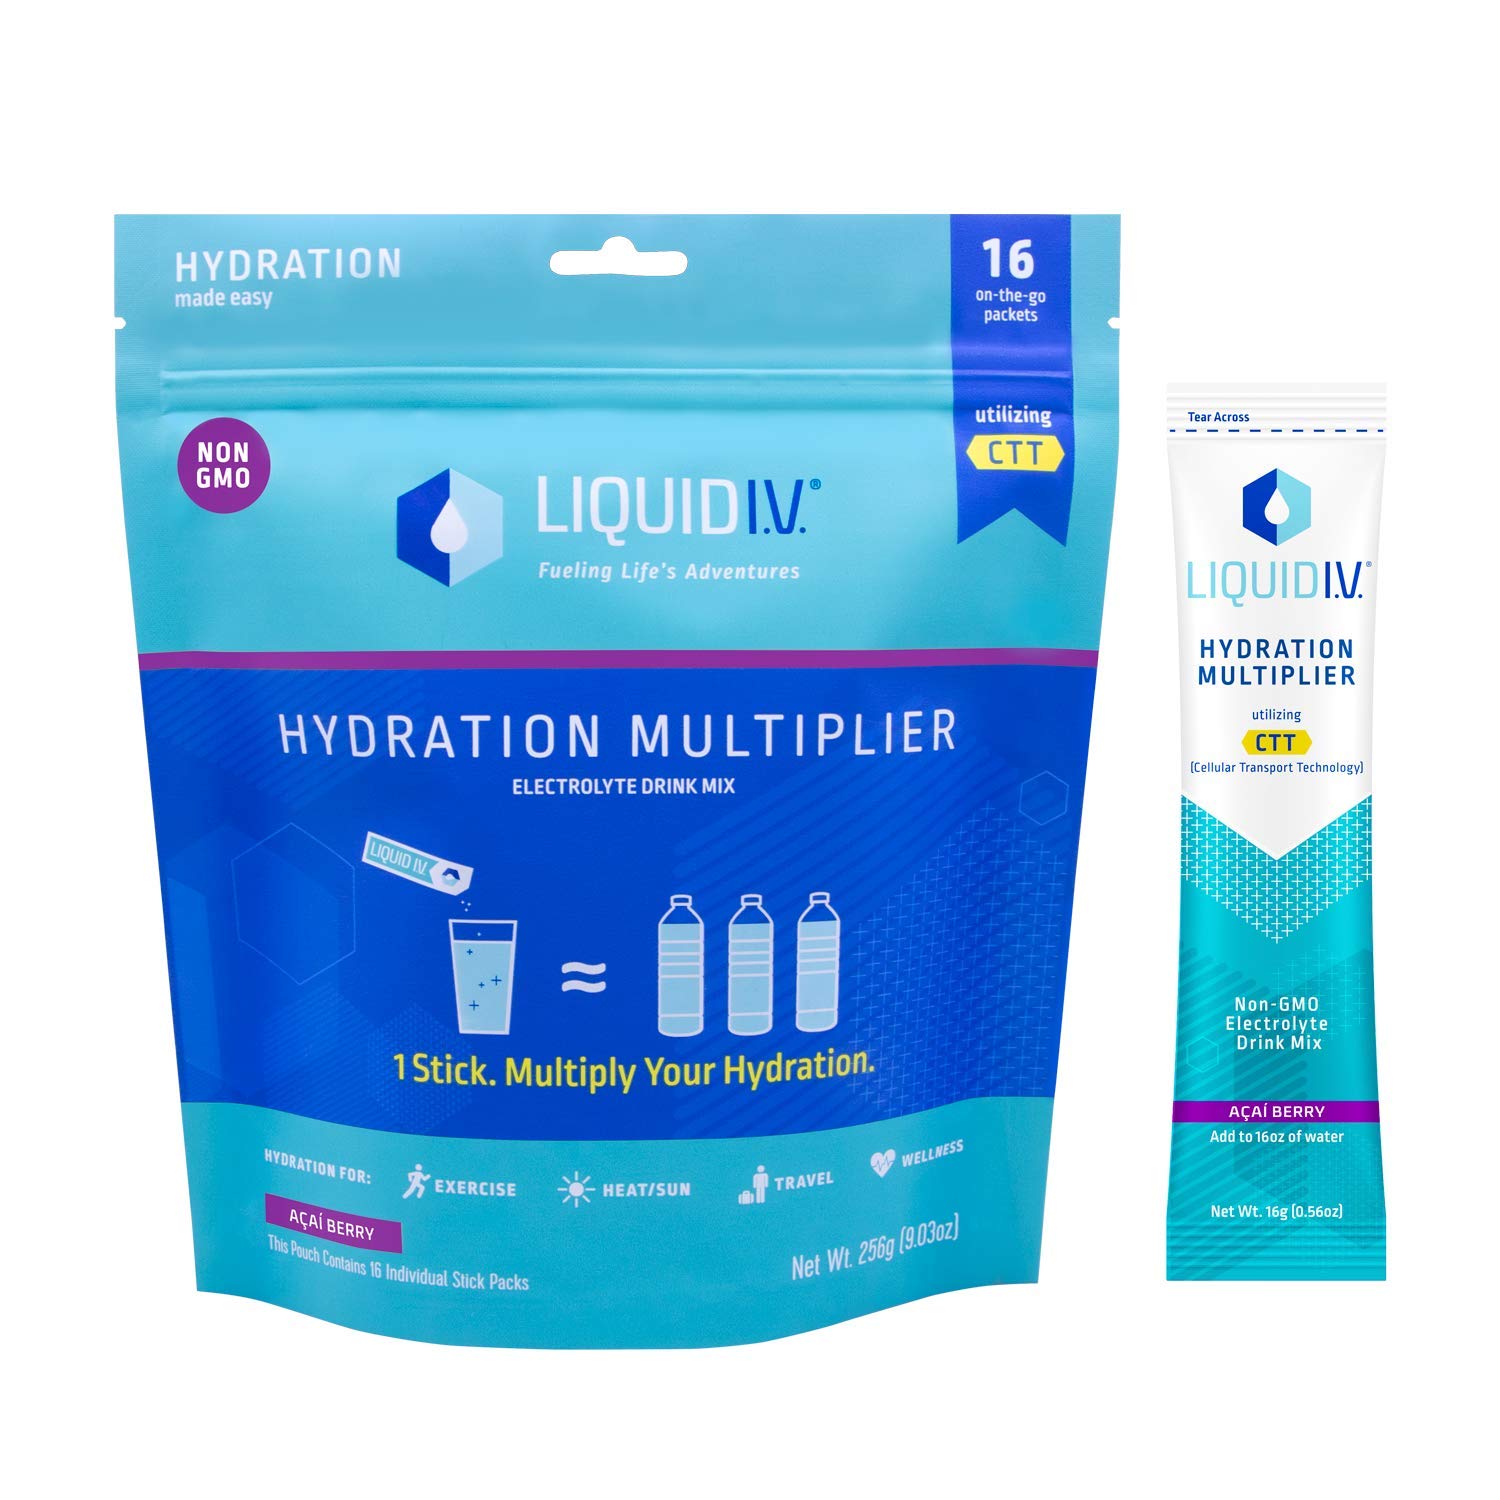 Liquid I.V. Hydration Multiplier, Electrolyte Powder, Easy Open Packets, Supplement Drink Mix (Acai Berry) (16)